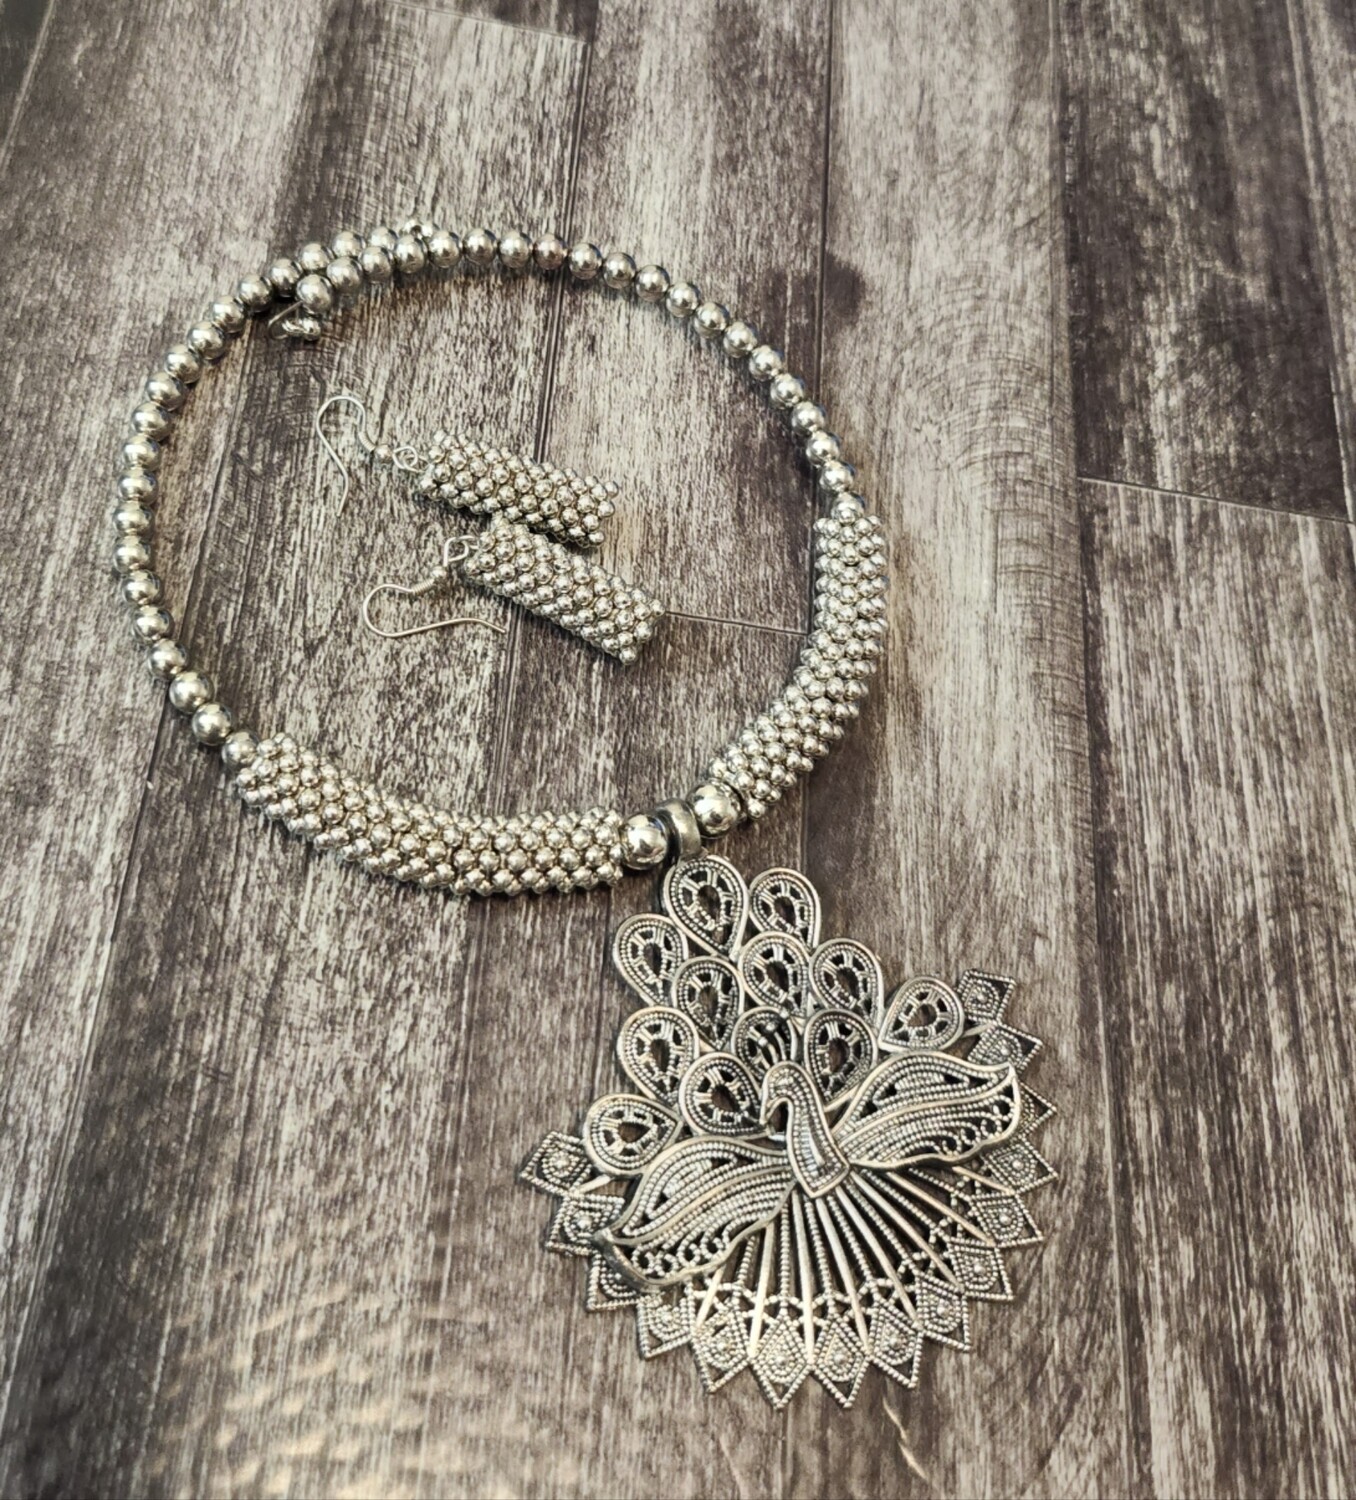 Oxidized Hasuli Peacock pendent weightless set